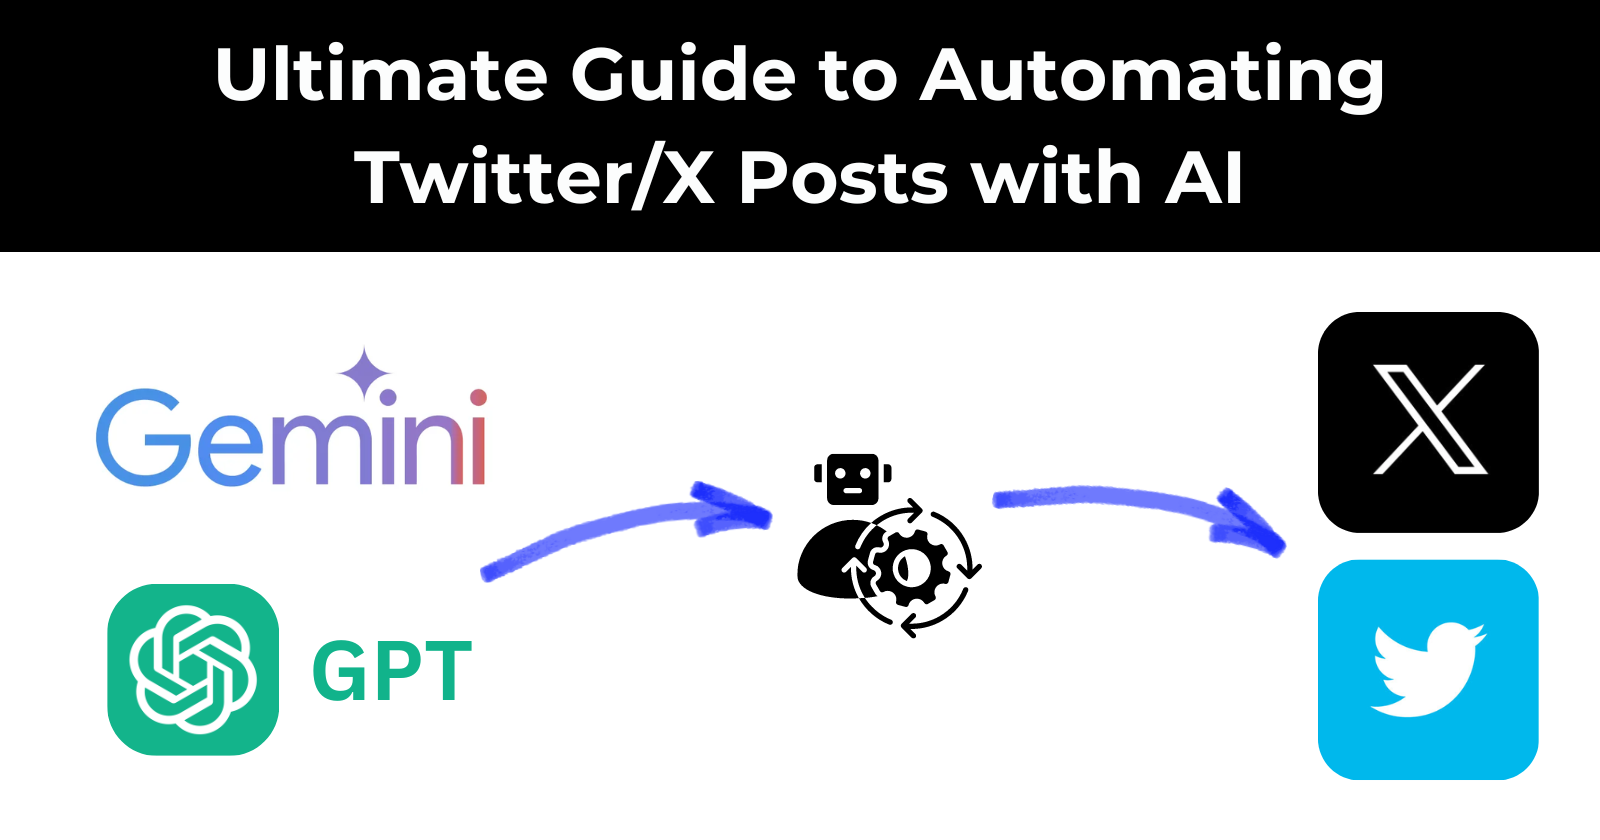 Ultimate Guide to Automating Twitter/X Posts with AI